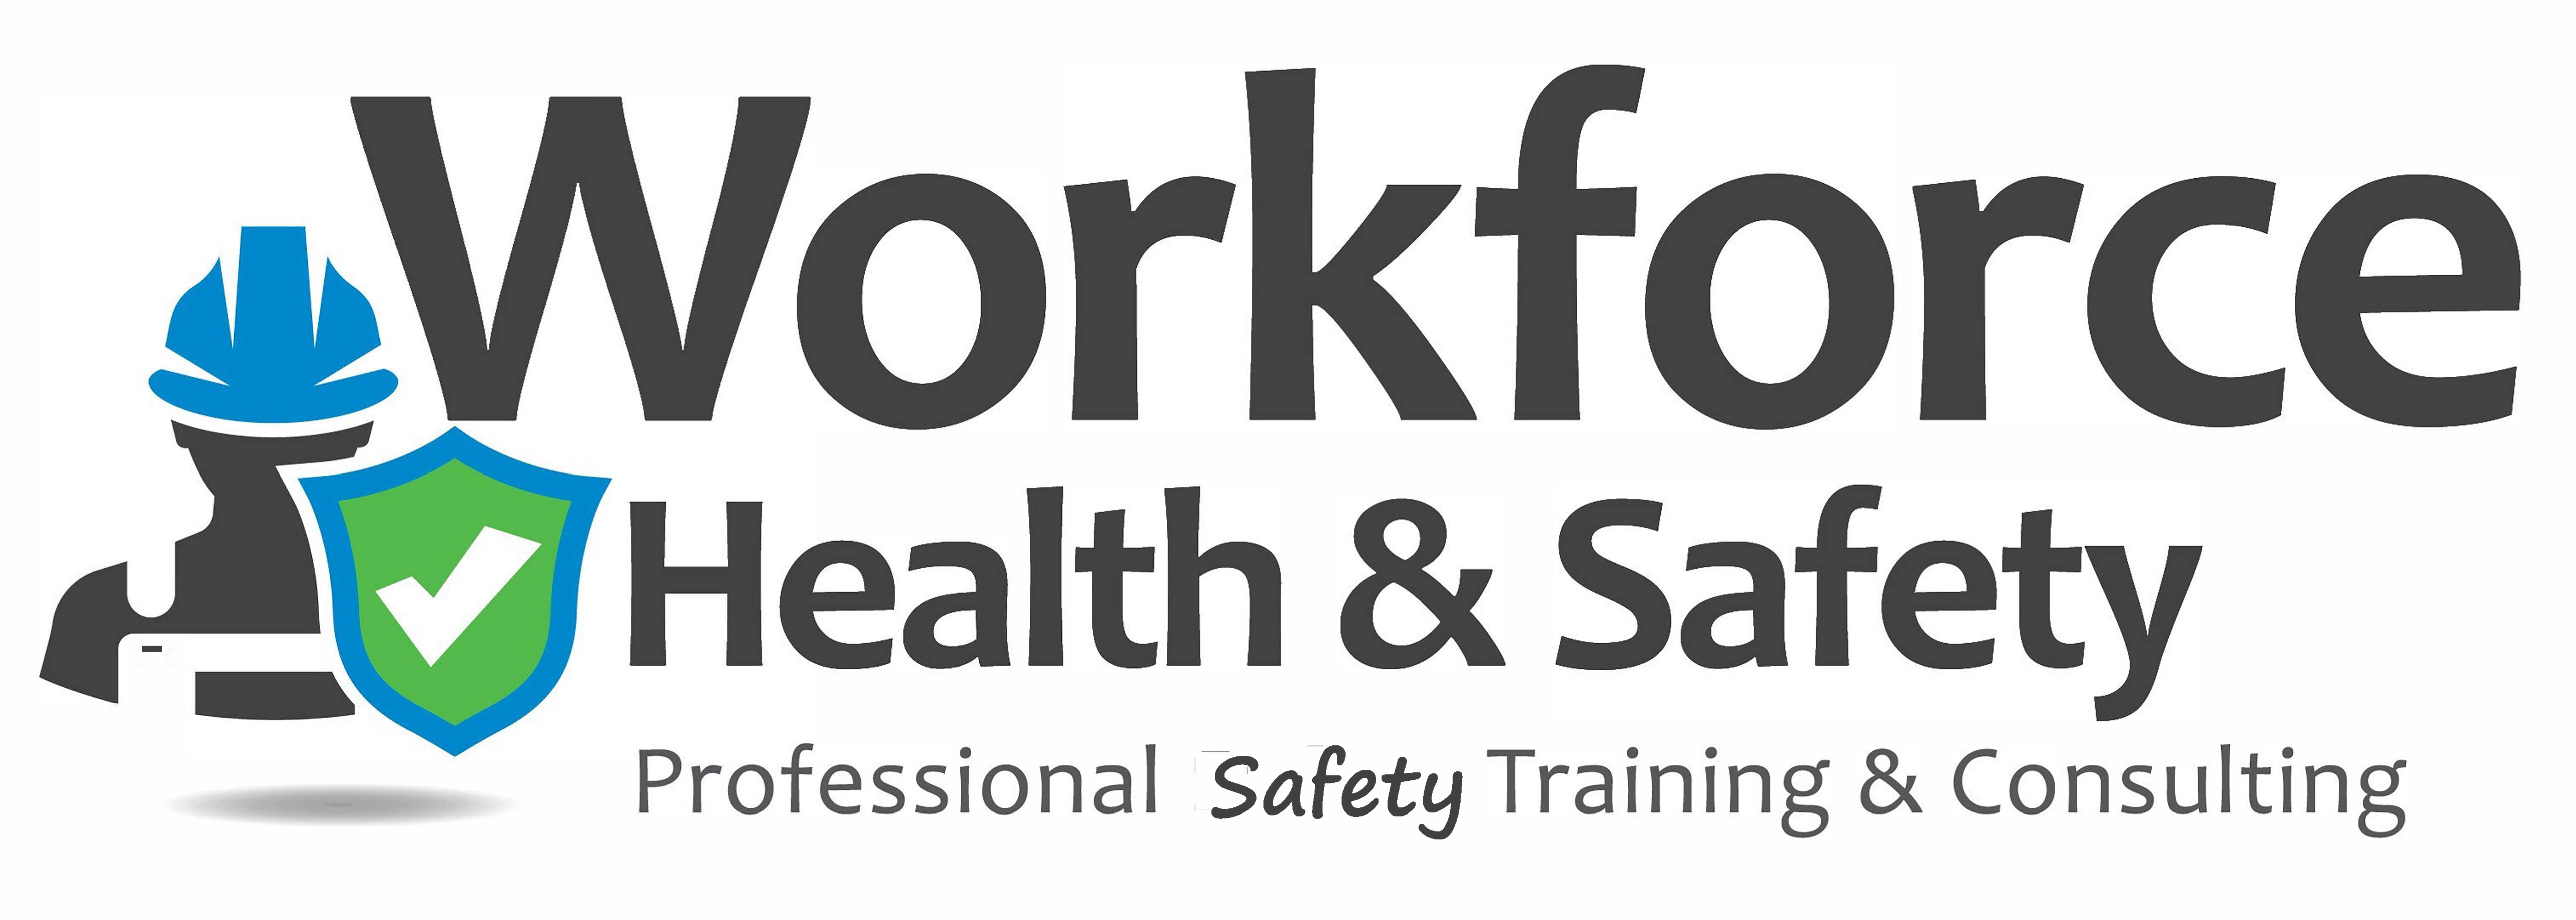 SAFETY TRAINING & CONSULTING SERVICES